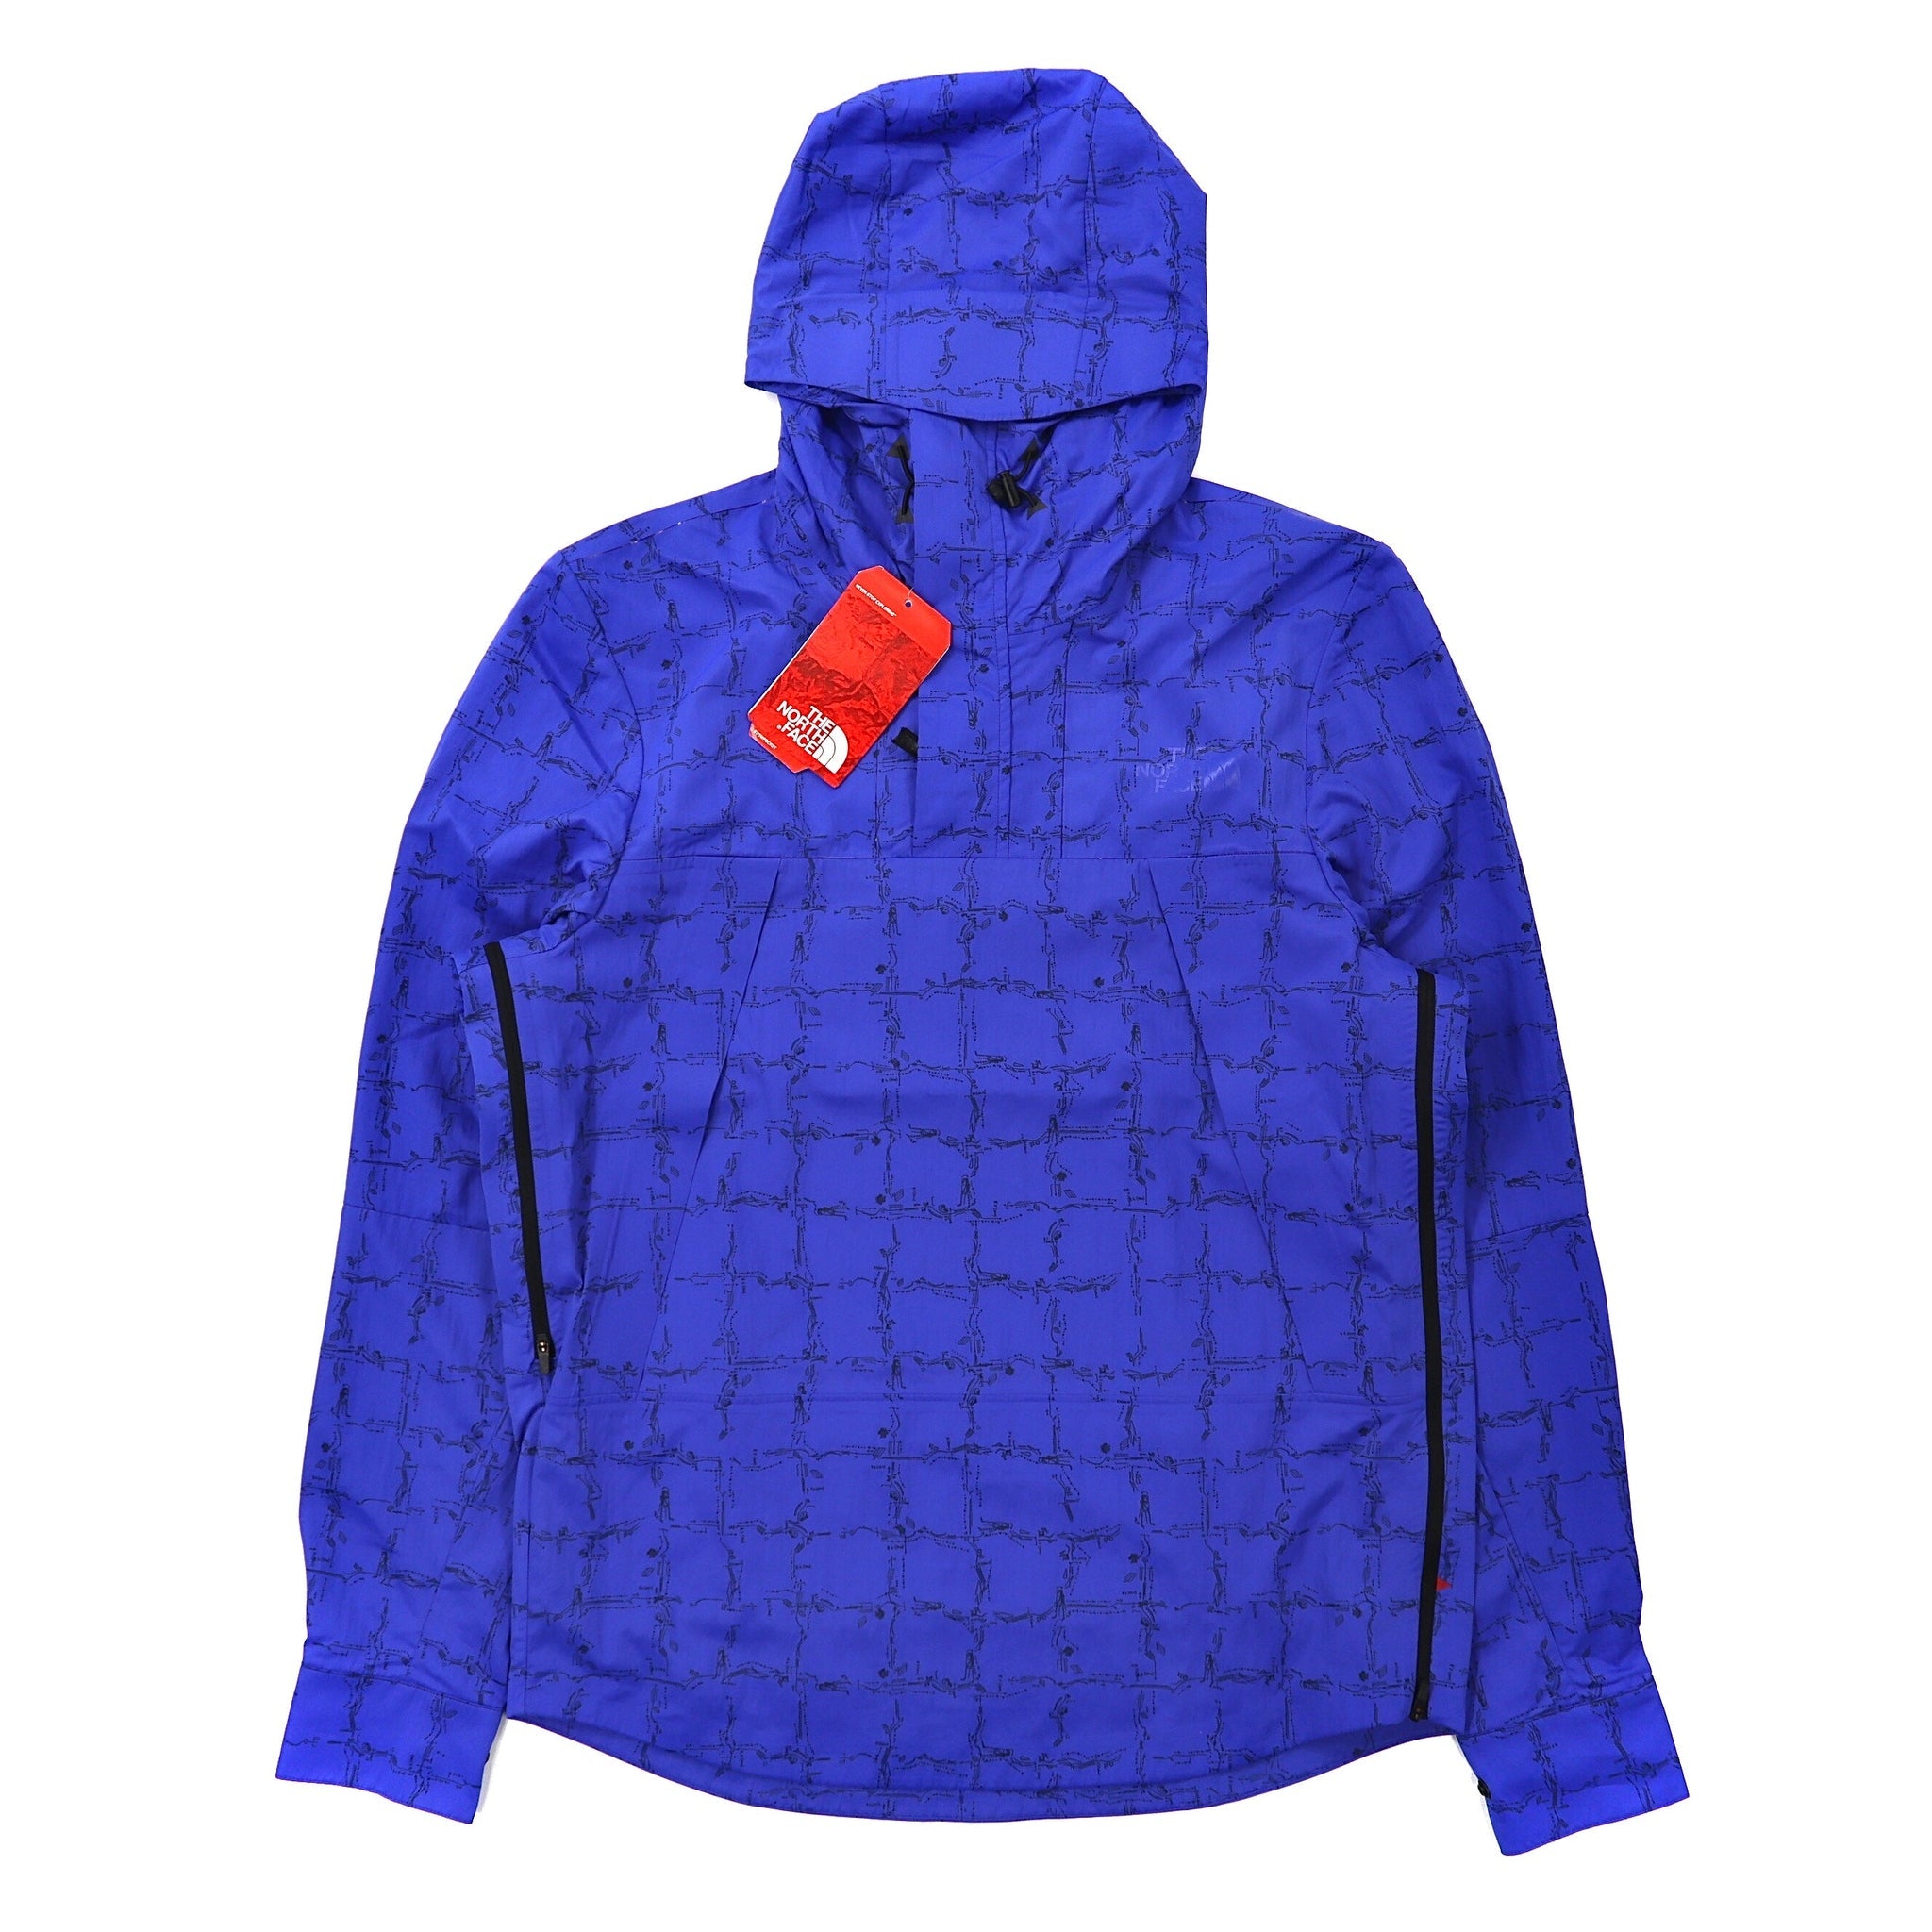 THE NORTH FACE RED LABEL × SLAM JAM Anorak Hoodie S Blue Patterned Overseas  Limited M1990 UNUSED